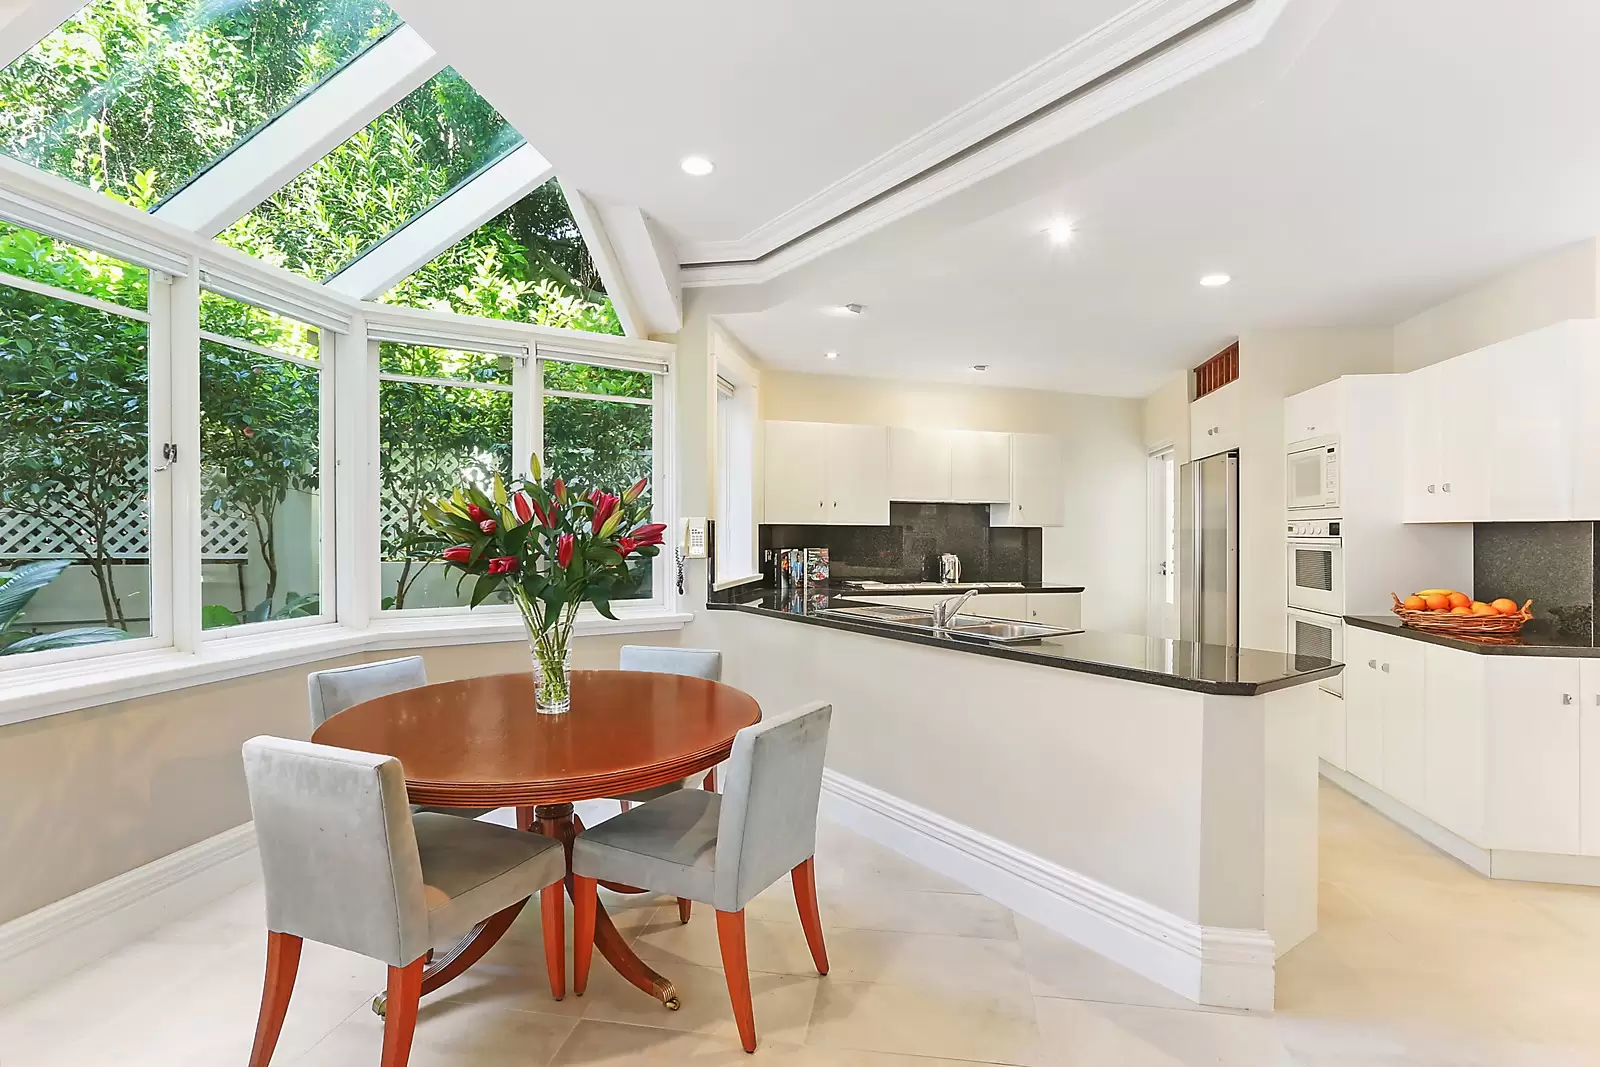 Photo #4: 2 Fitzwilliam Road, Vaucluse - Sold by Sydney Sotheby's International Realty